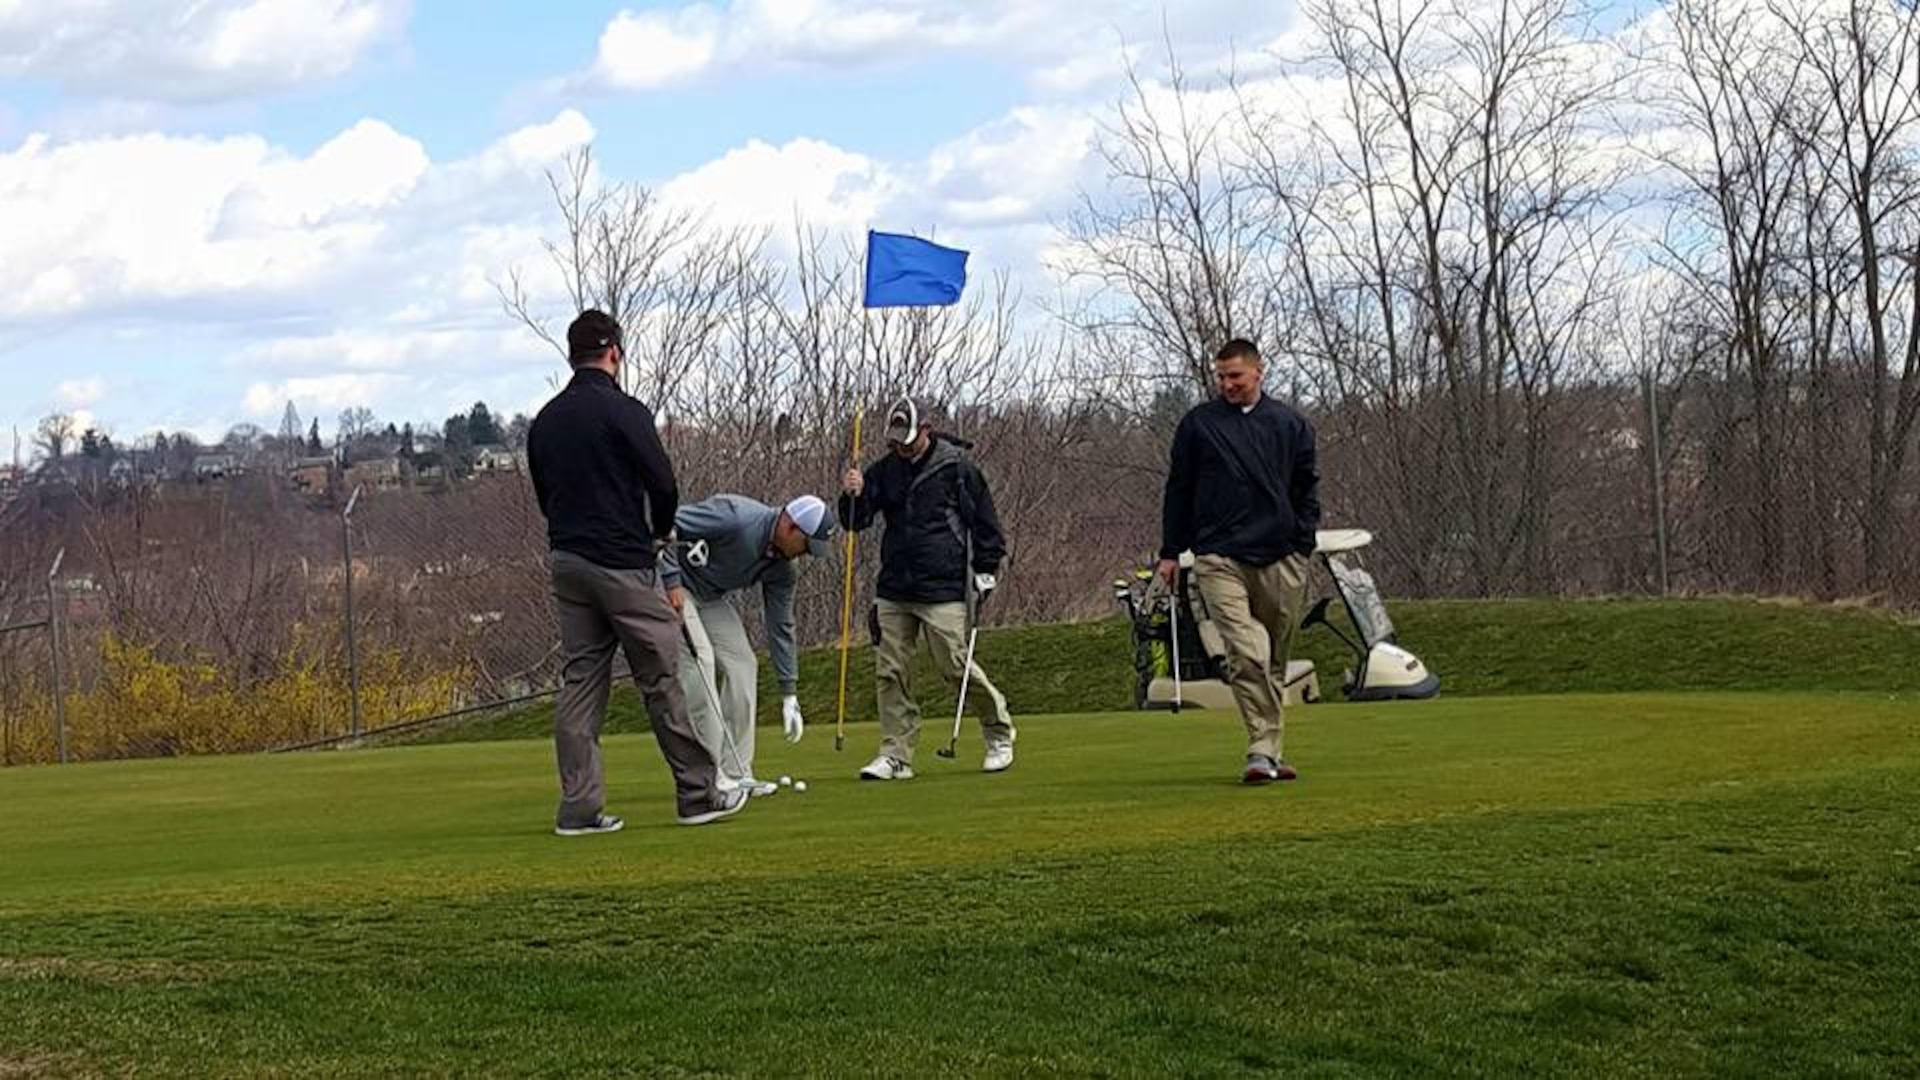 Participants compete for first place during the Riverview St. Patrick’s Day Golf Tournament on March 18.